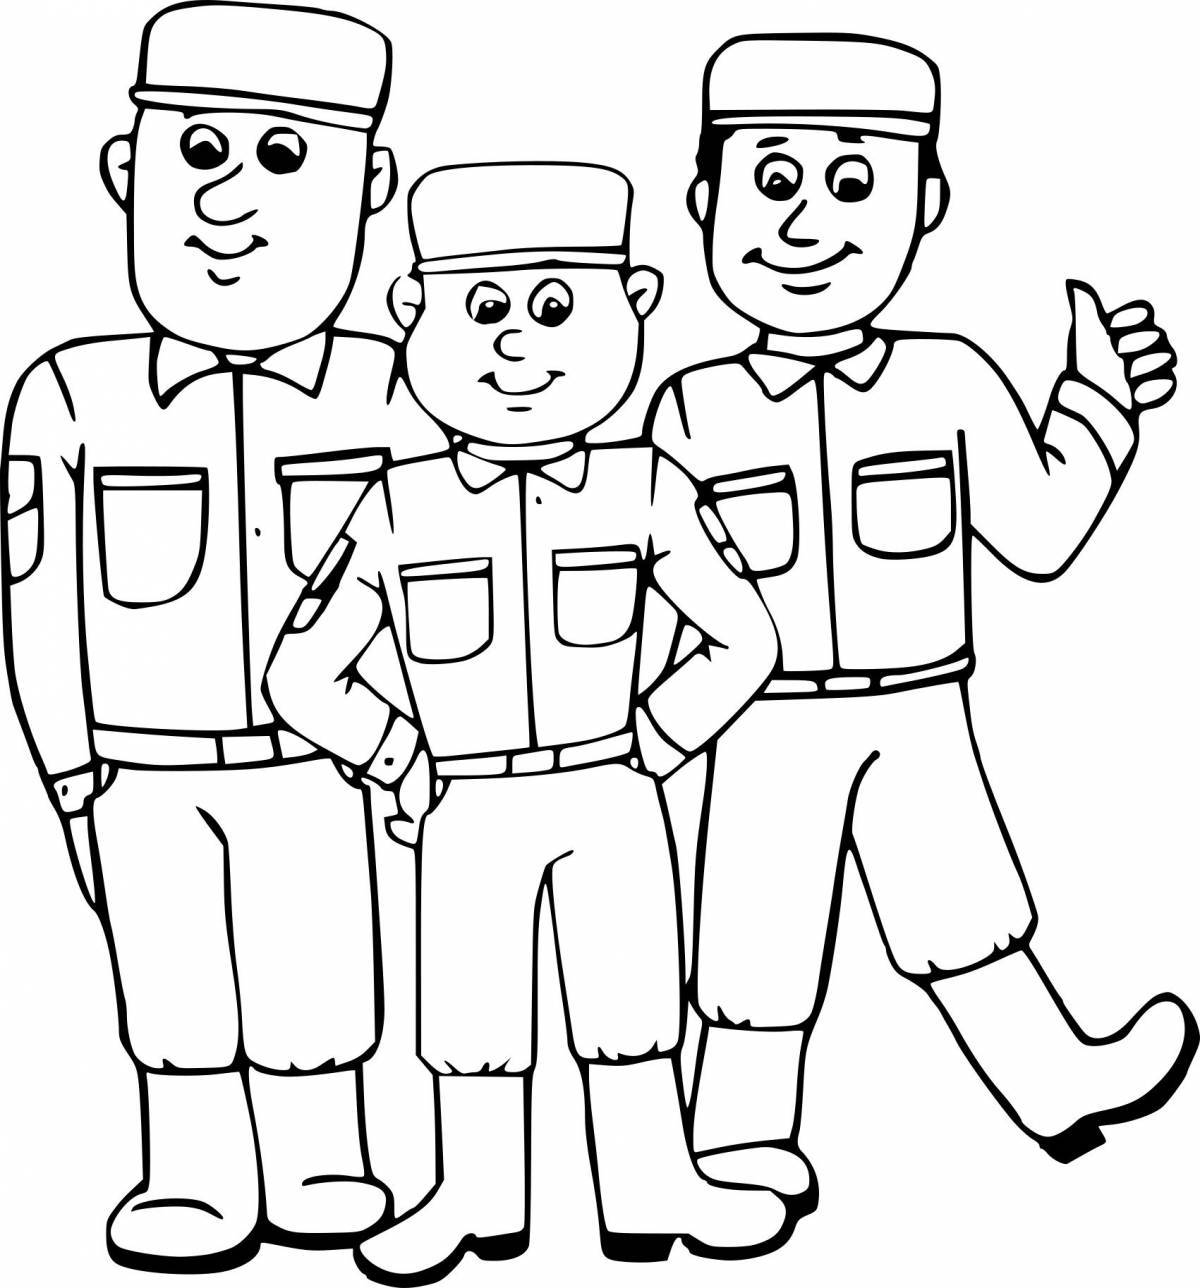 Fun coloring for soldiers for kids